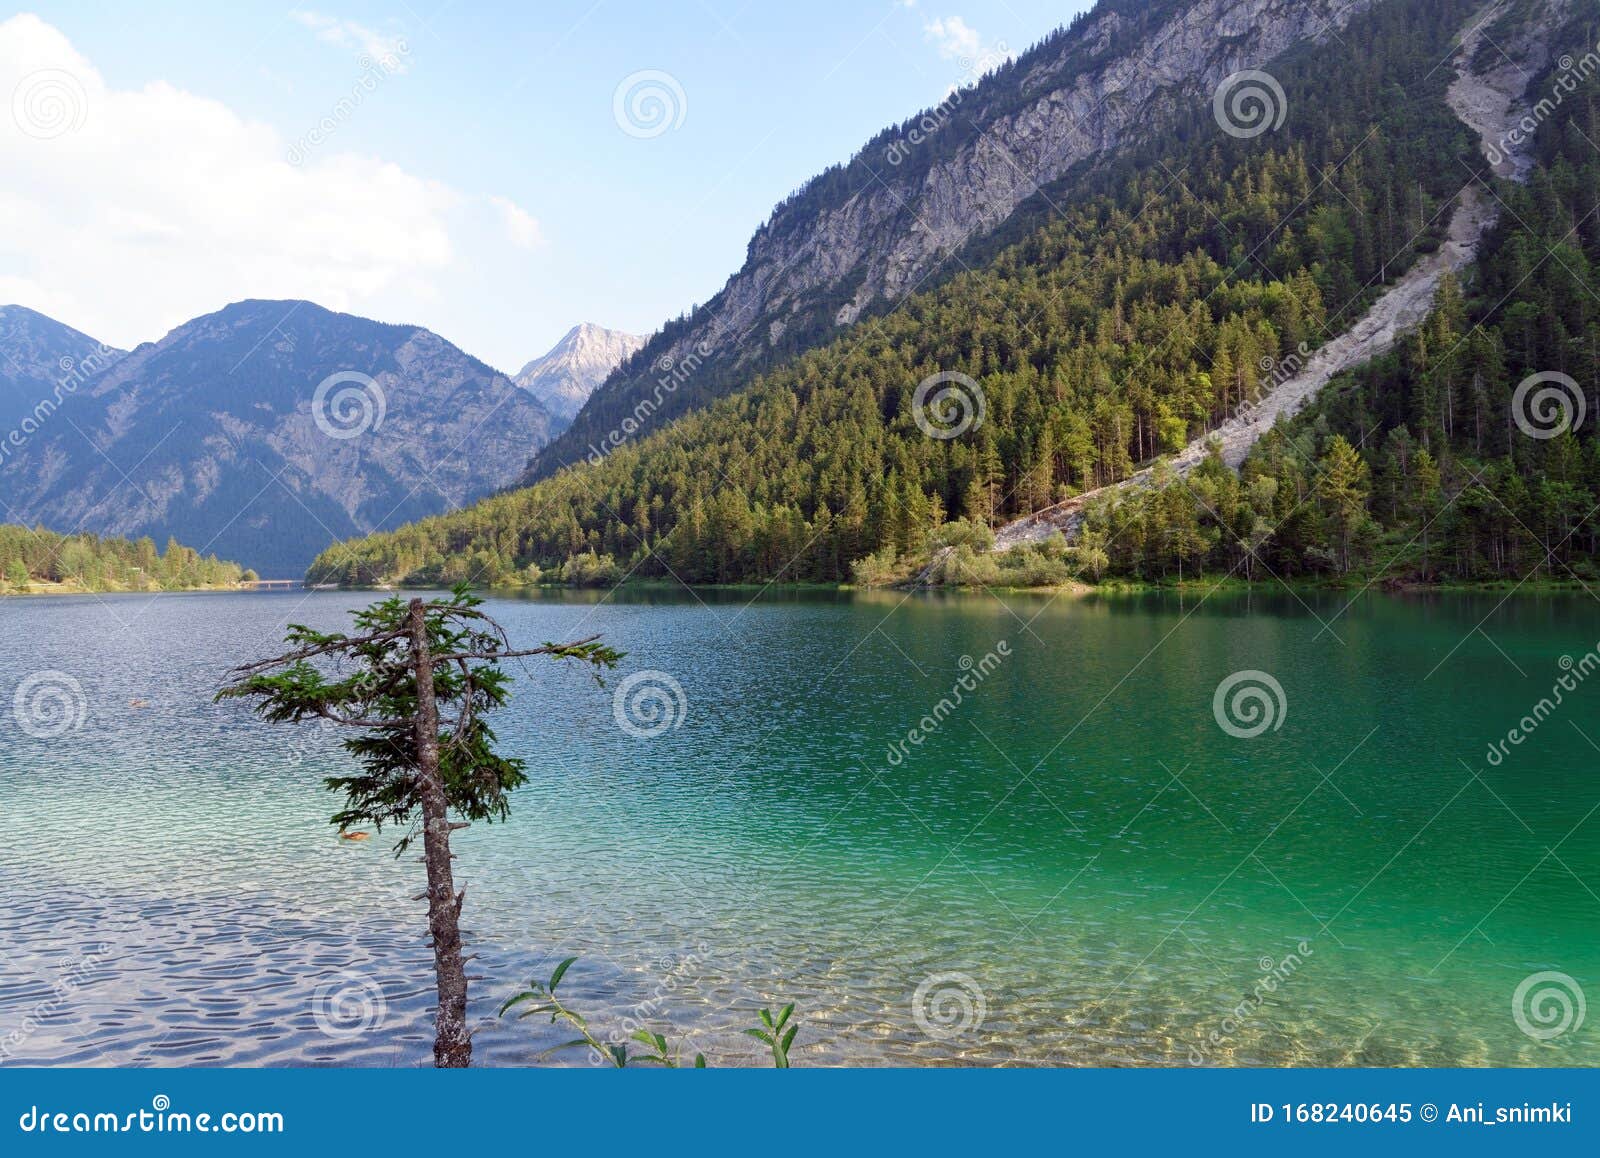 Plansee Lake In The Alps Mountain Stock Image Image Of Scenery